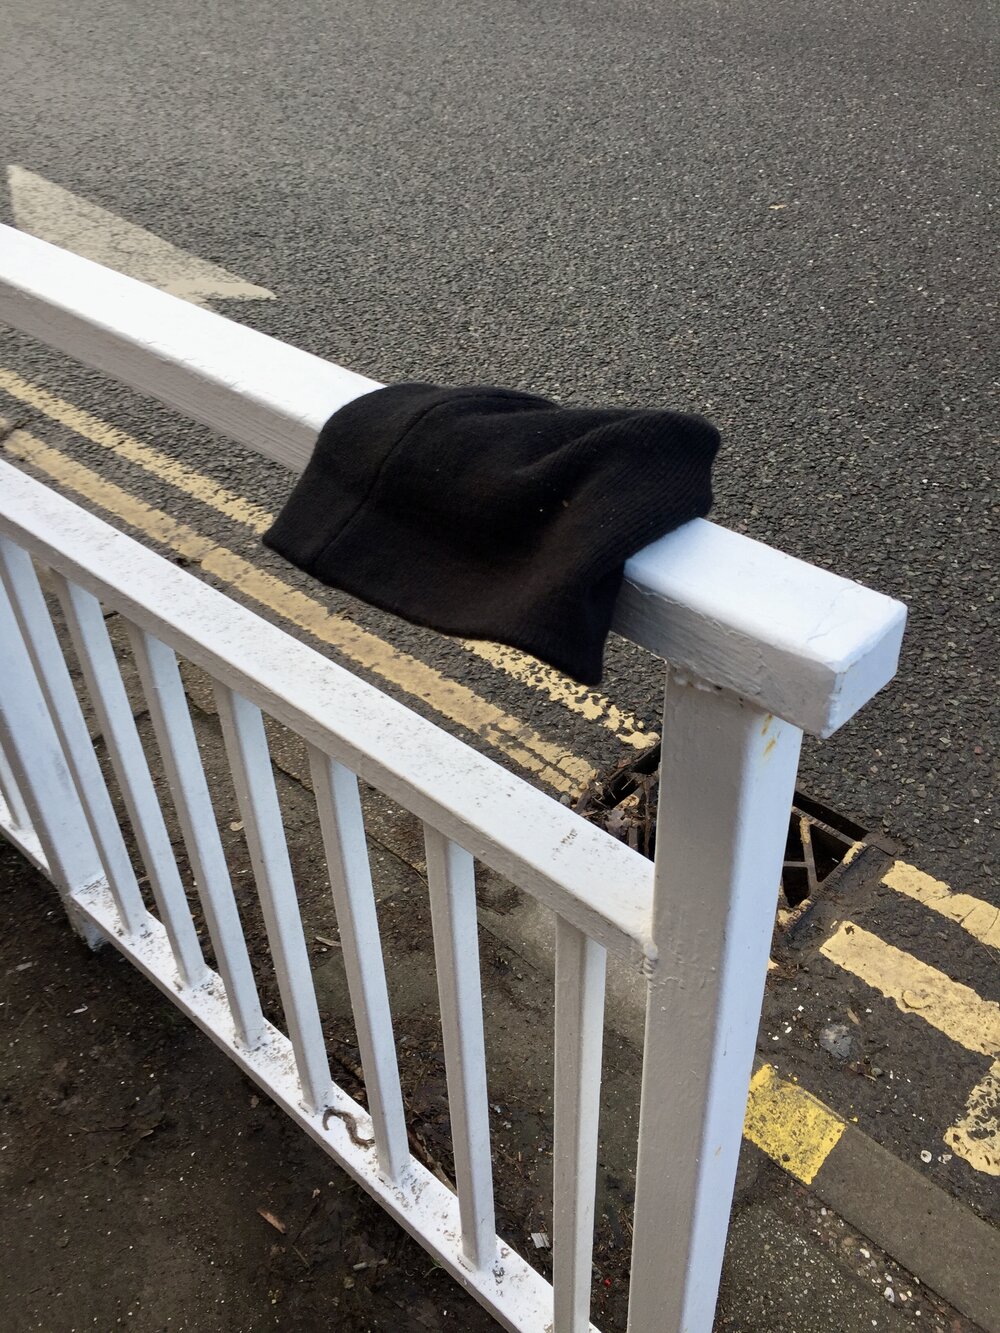  A black beanie hat flops over a white railing next to a road. 